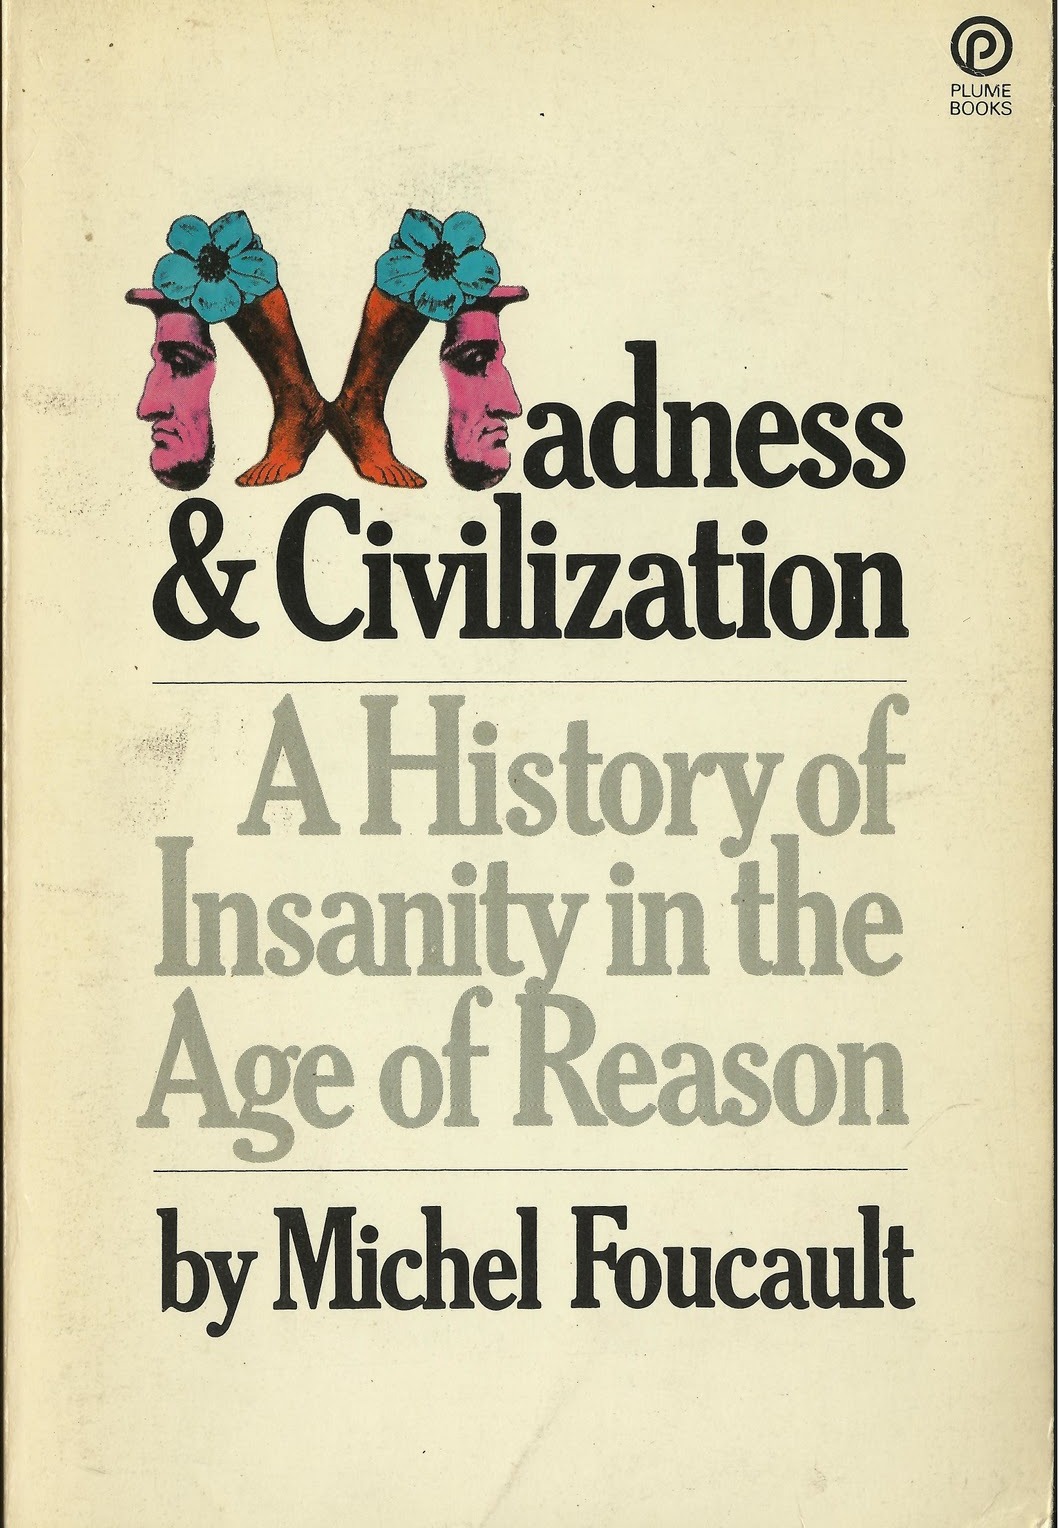 Madness and Civilization A History of Insanity in the Age of Reason by Michel Foucault